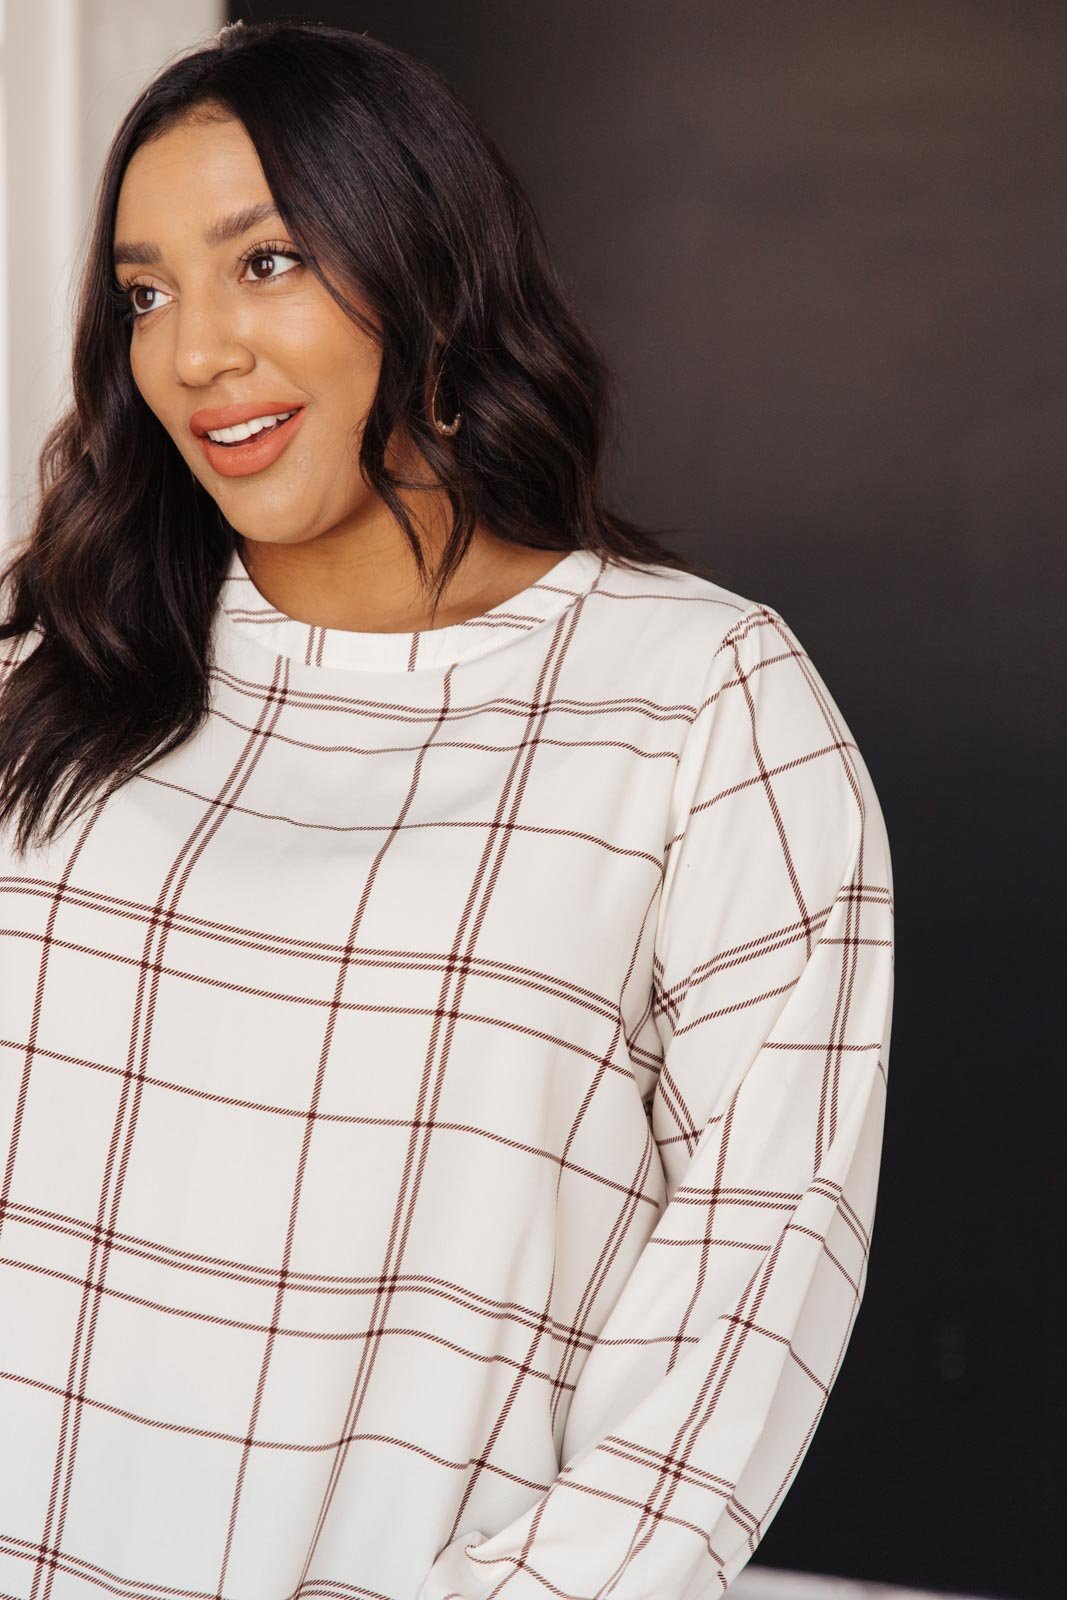 Playing In Plaid Top (Online Exclusive)